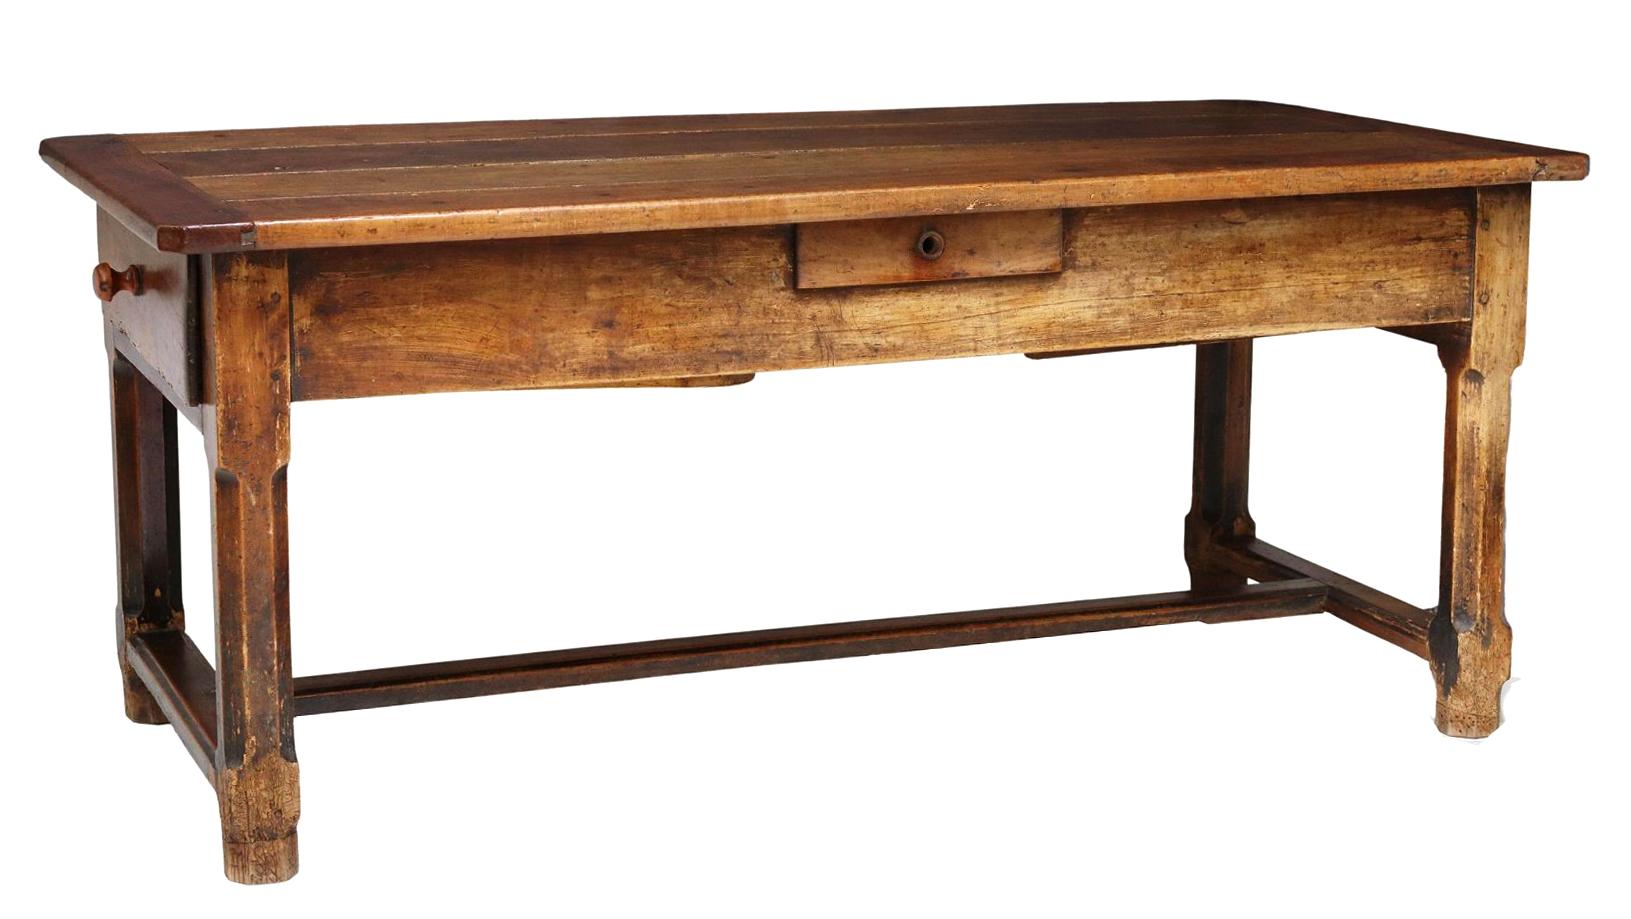 Antique French Provincial oak farmhouse table, 19th c. This table features a four-plank top, over three drawers, rising on chamfered supports, joined by H stretcher. There is evidence of old woodworm which is typical of antique furniture form Europe